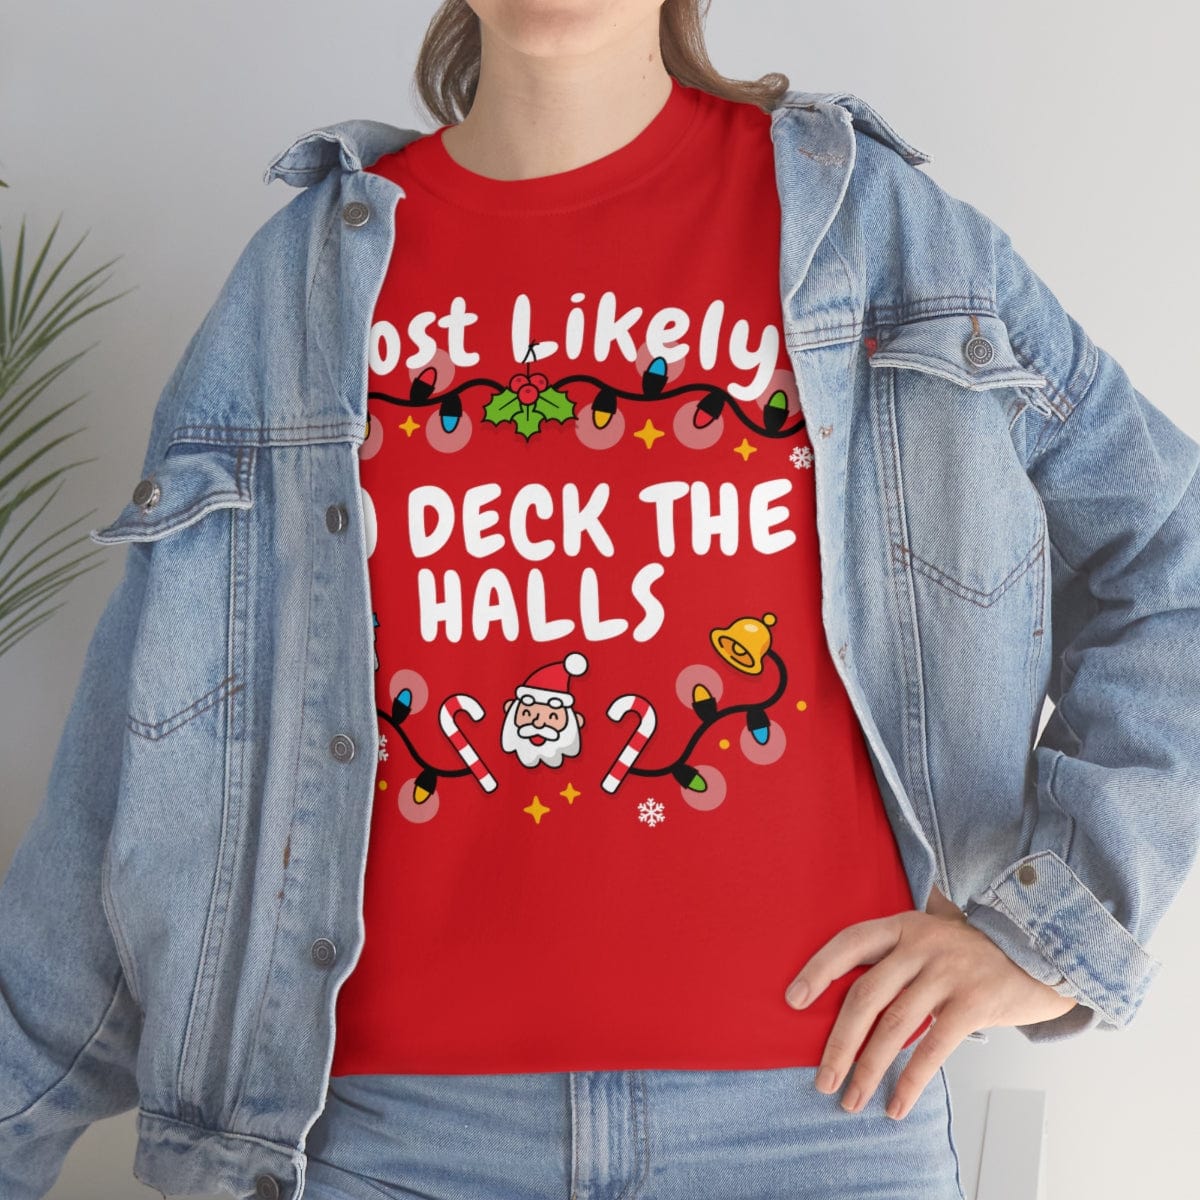 TO DECK THE HALLS